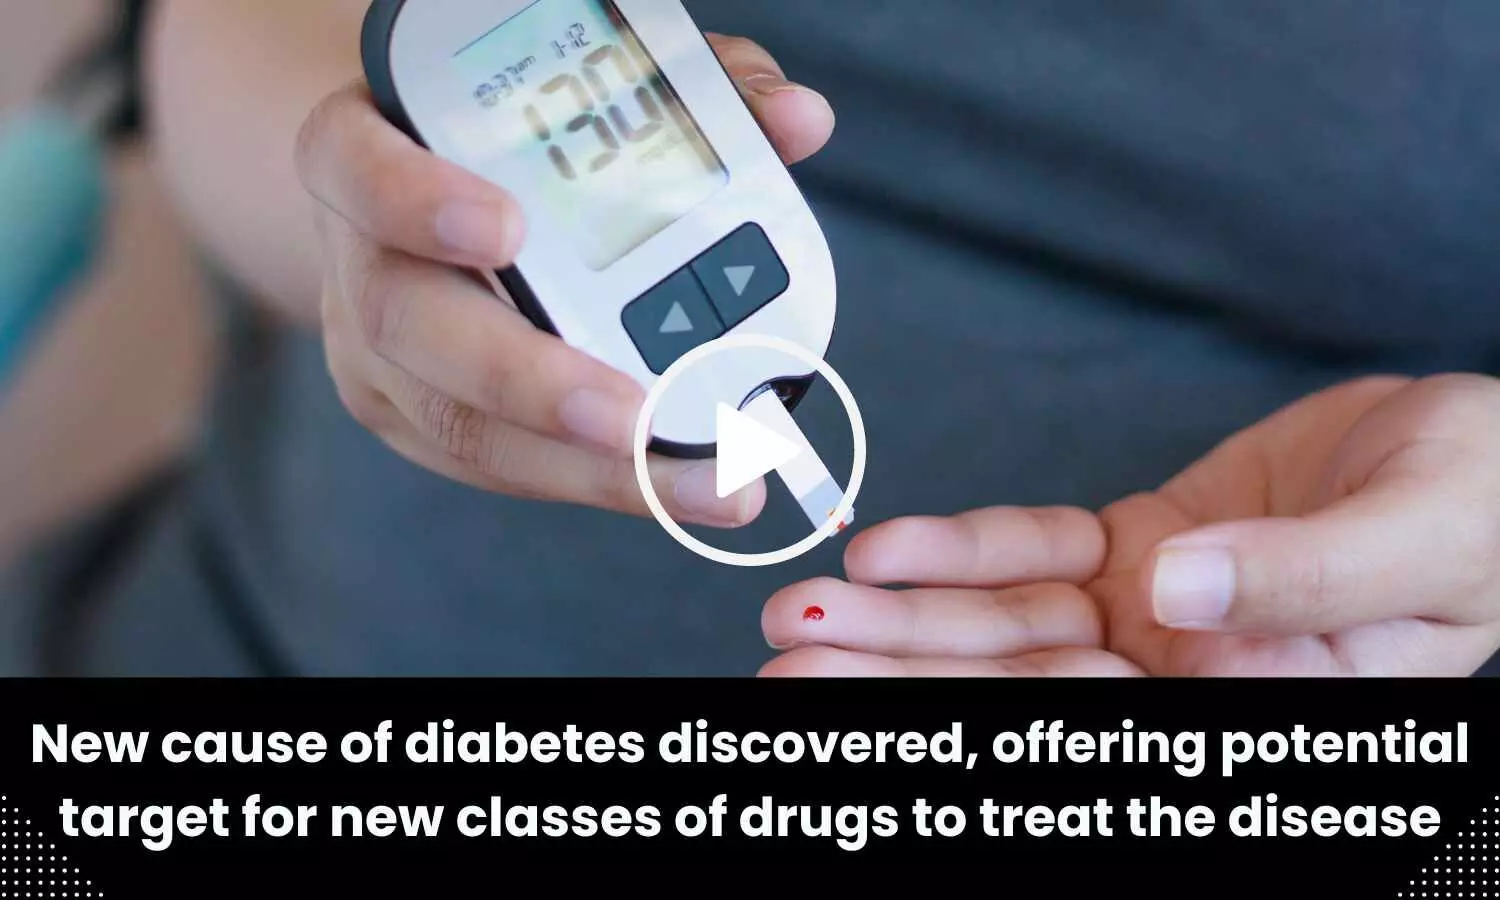 New cause of diabetes discovered, offering potential target for new classes of drugs to treat the disease